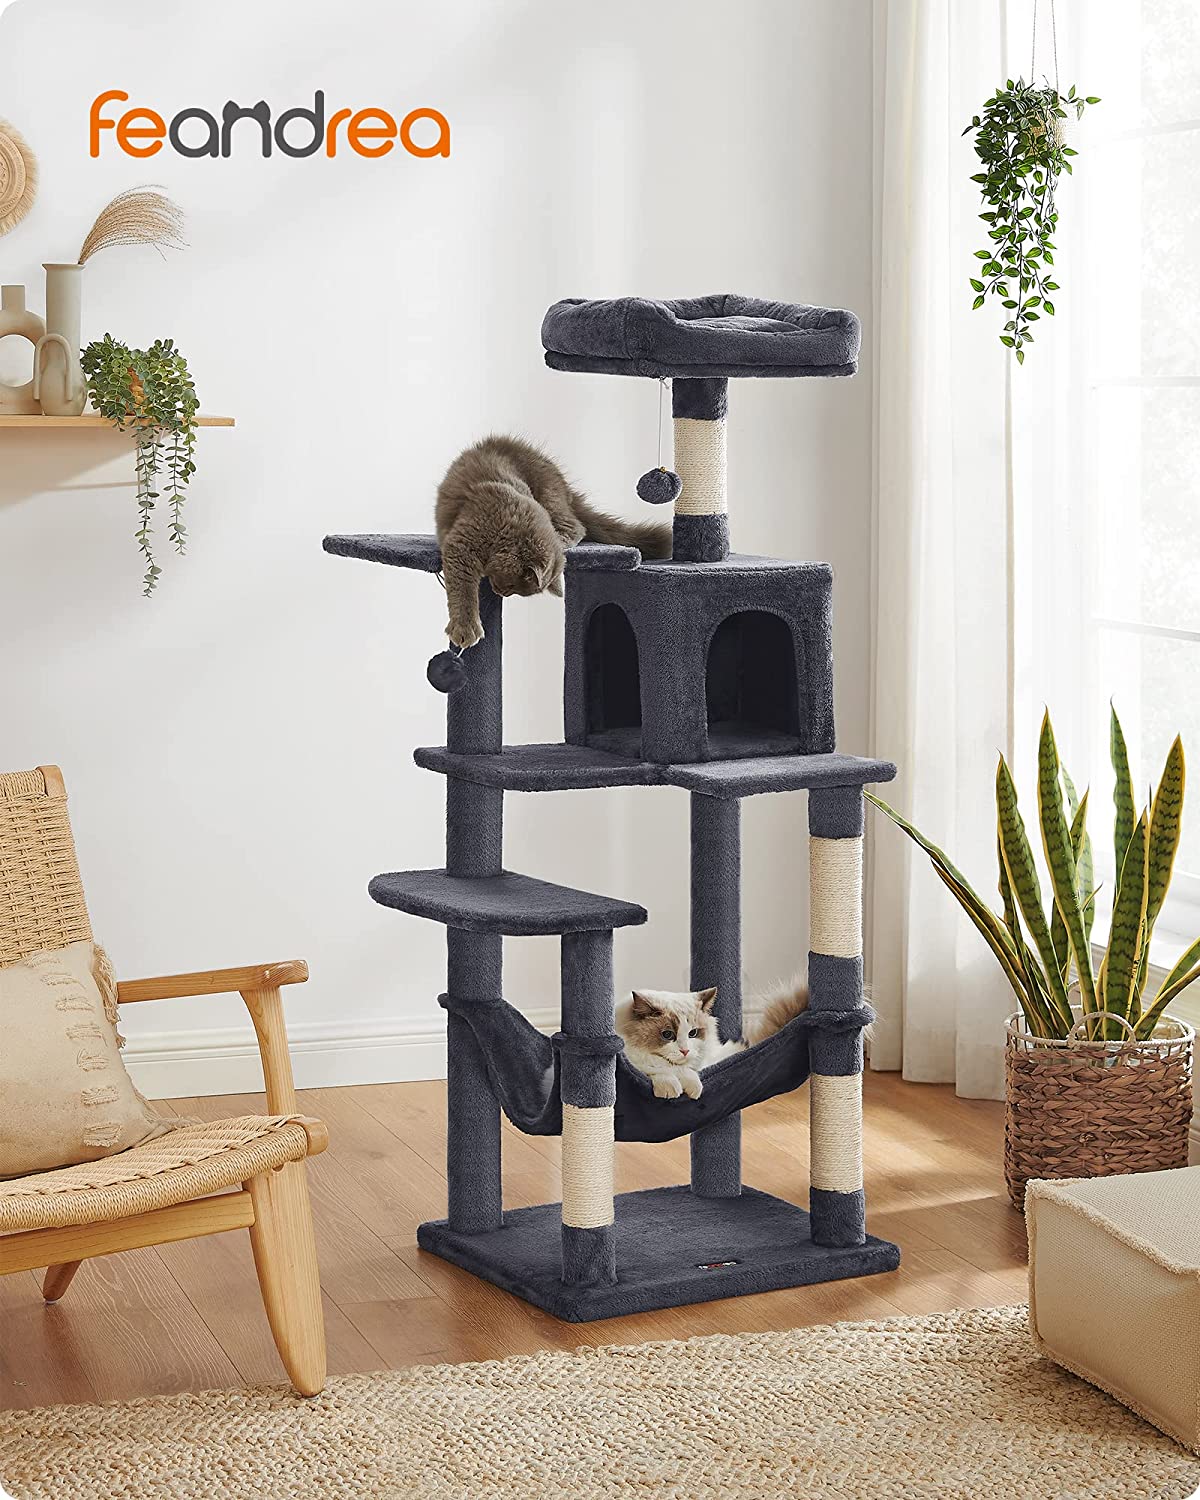 143cm Tall Cat Tree, Cat Scratching Post, with 4 Scratching Posts, 2 Perches, 1 Cave, 1 Hammock, 2 Pompoms, Multi-Level Plush, Smoke Gray